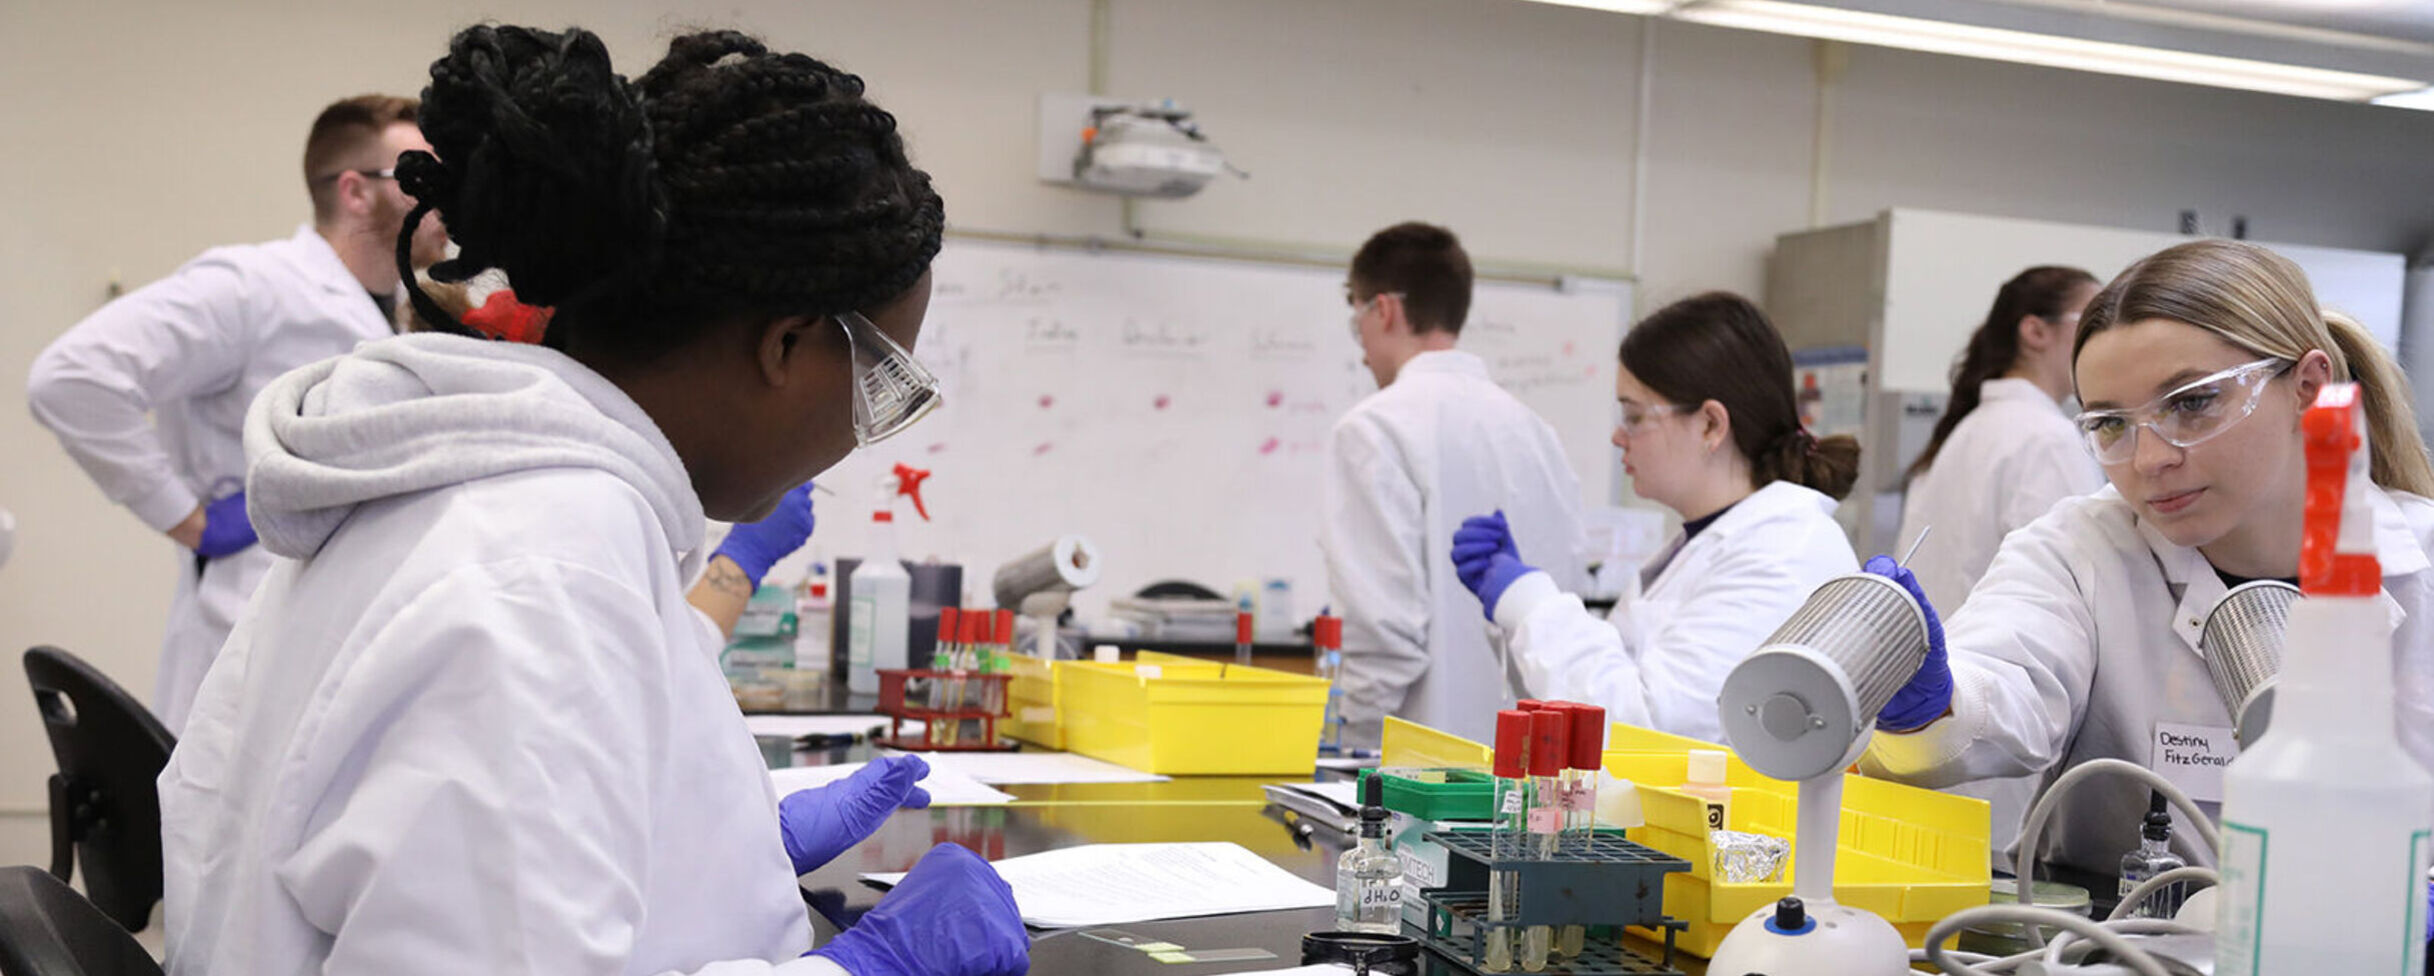 Students work on science lessons in a laboratory